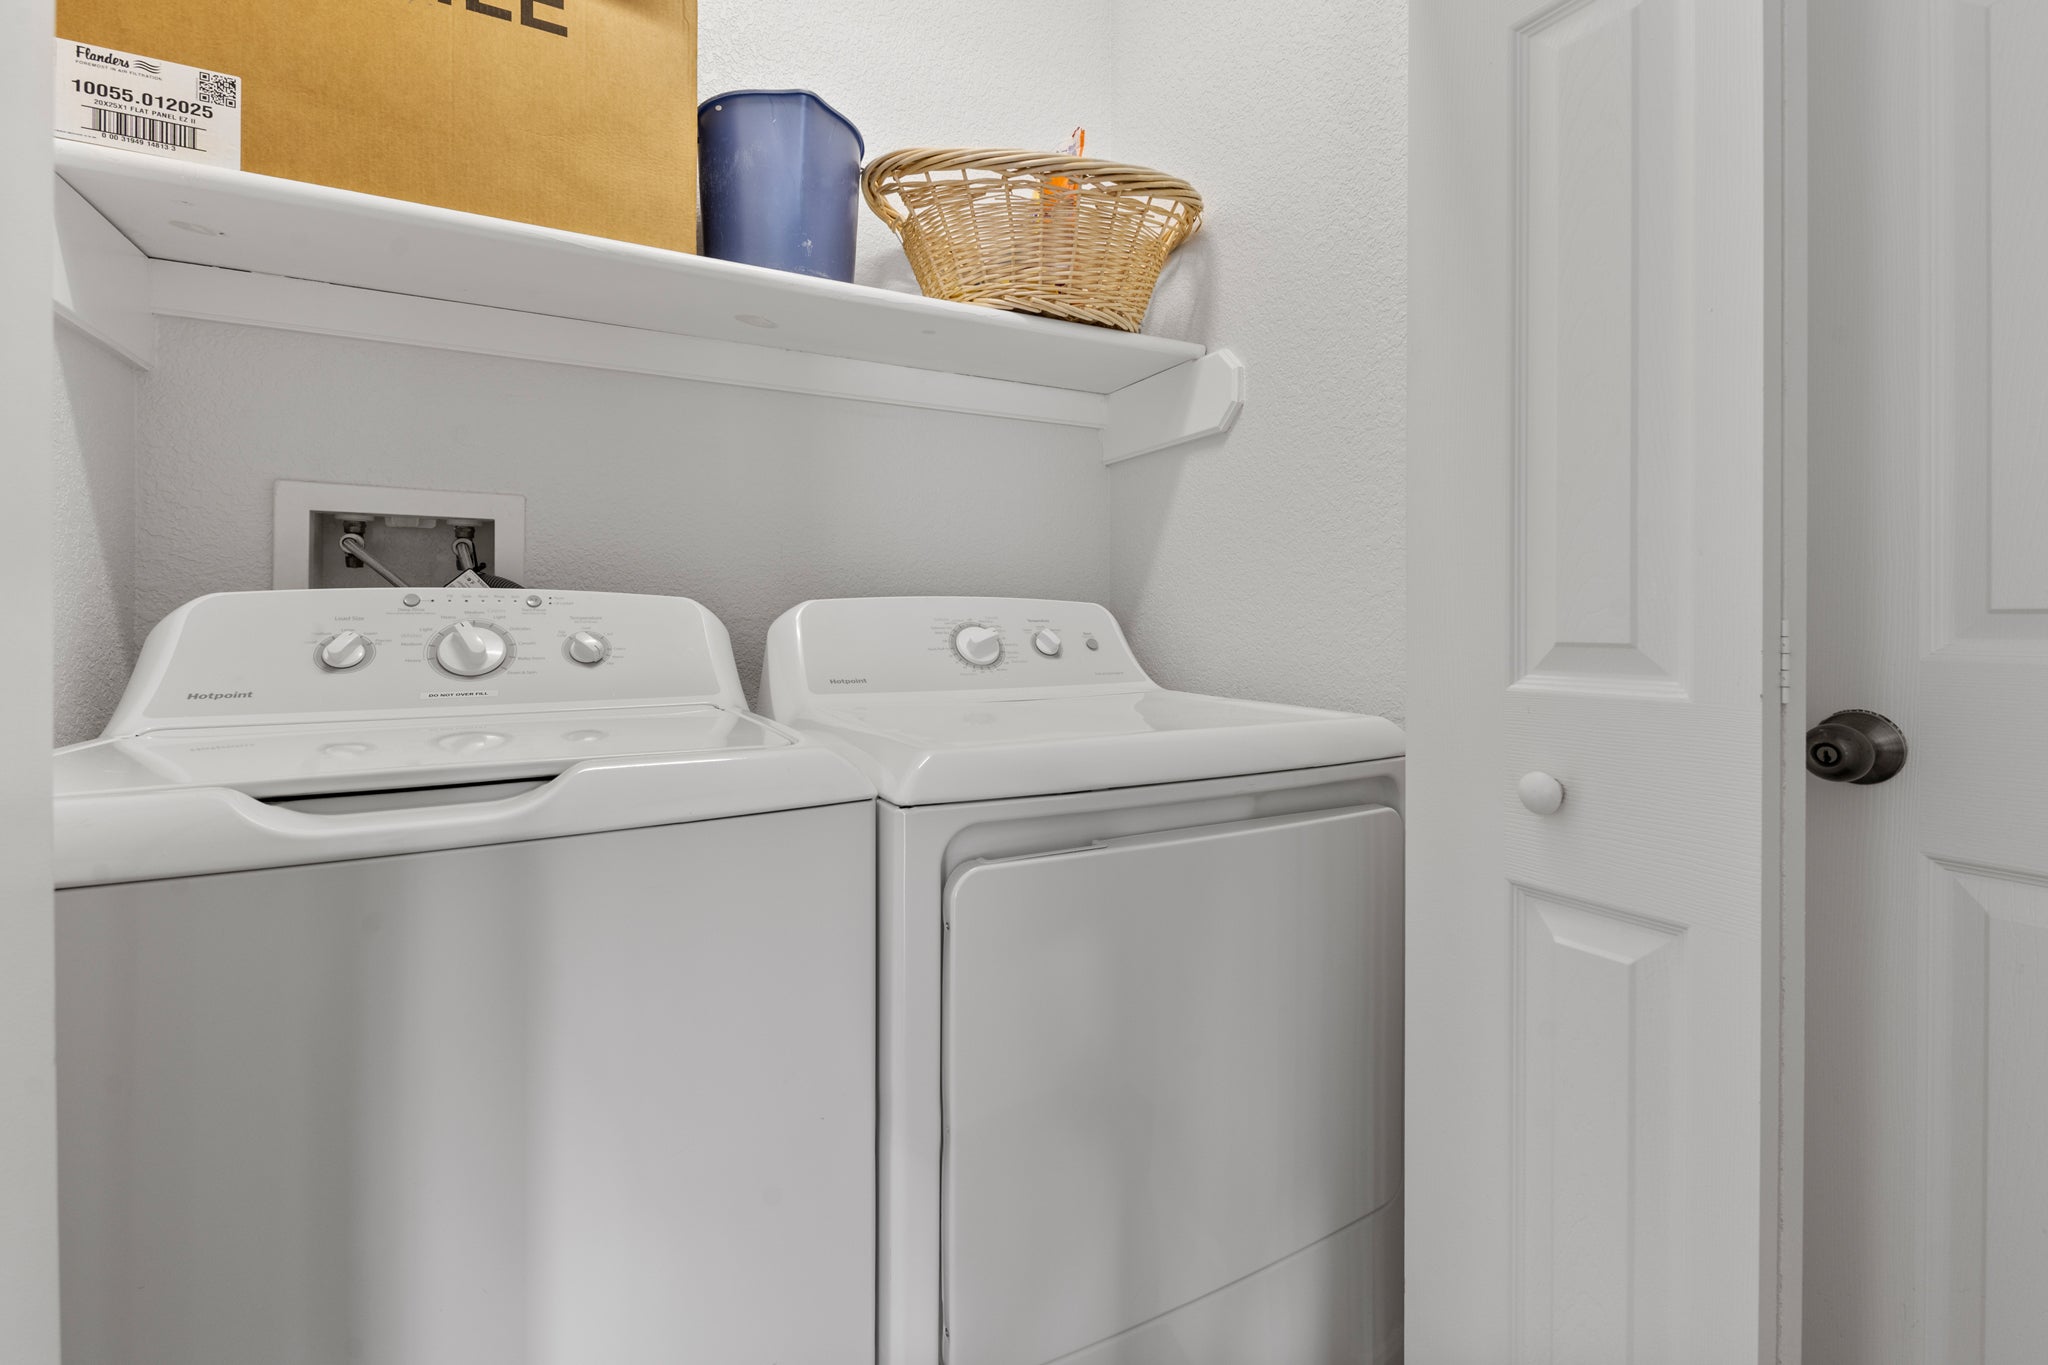 WH643: Dancing Days | Bottom Level Laundry Area